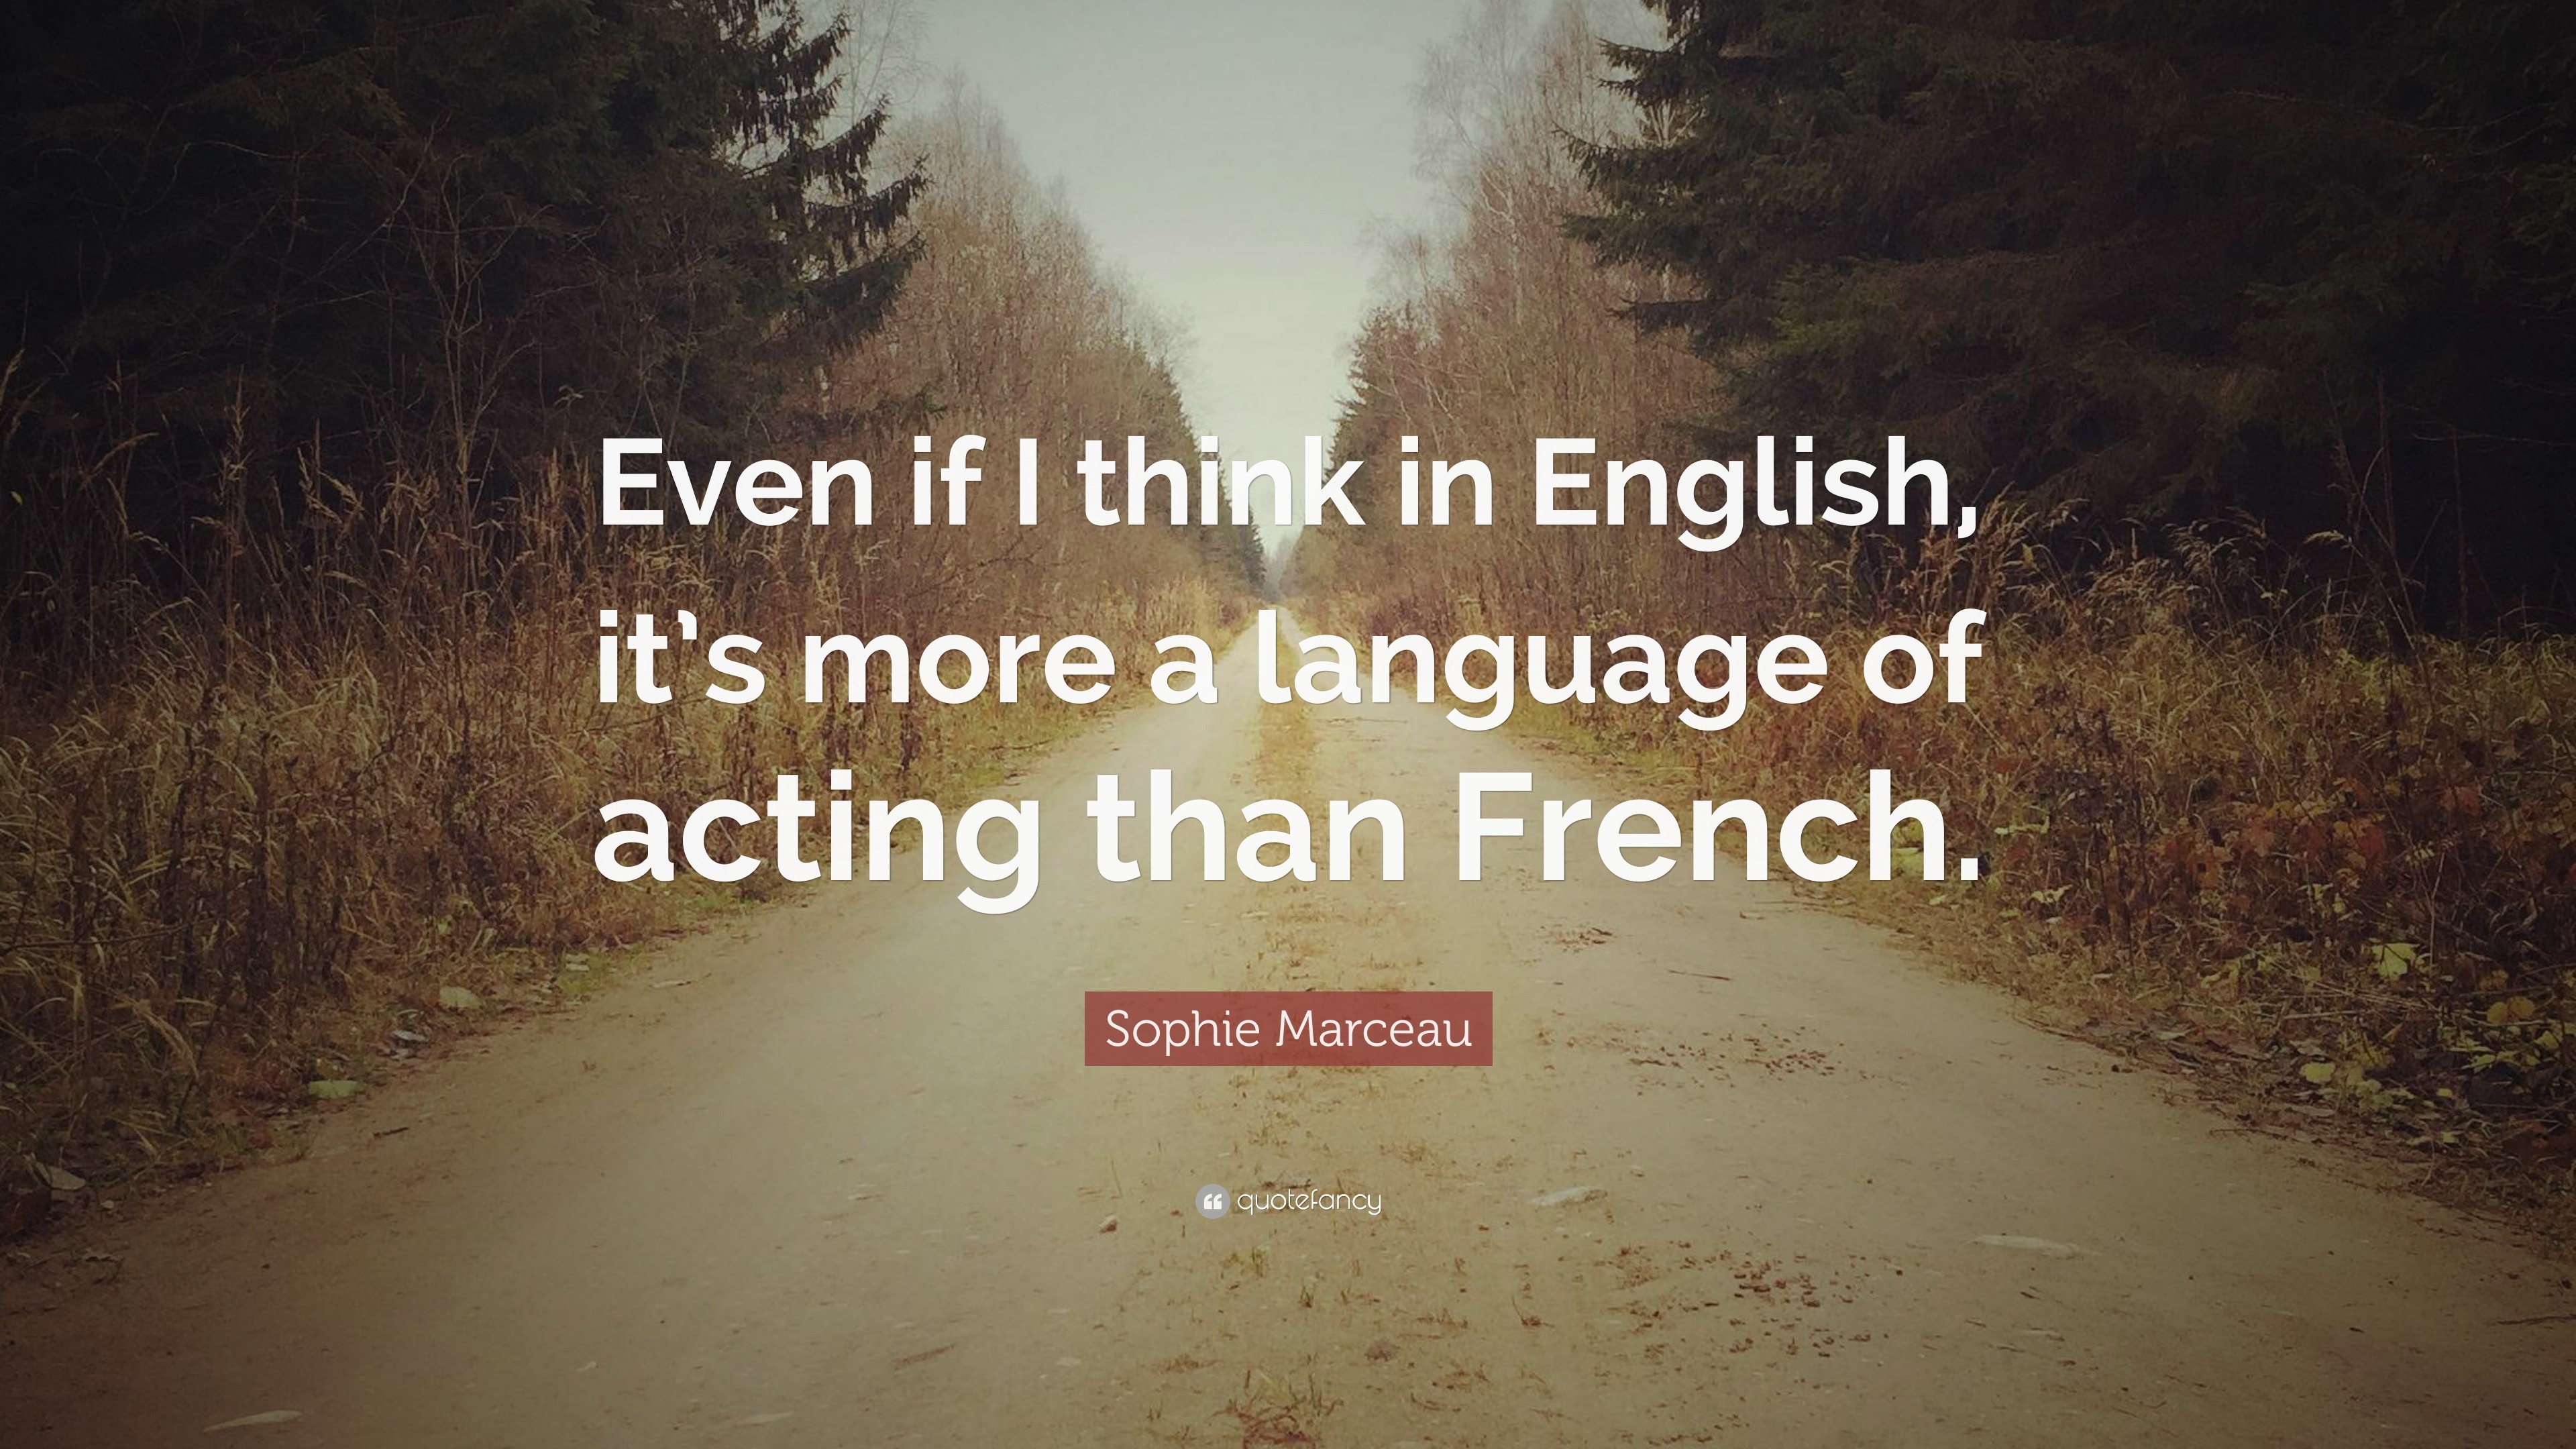 Sophie Marceau Quote: “Even if I think in English, it’s more a language ...